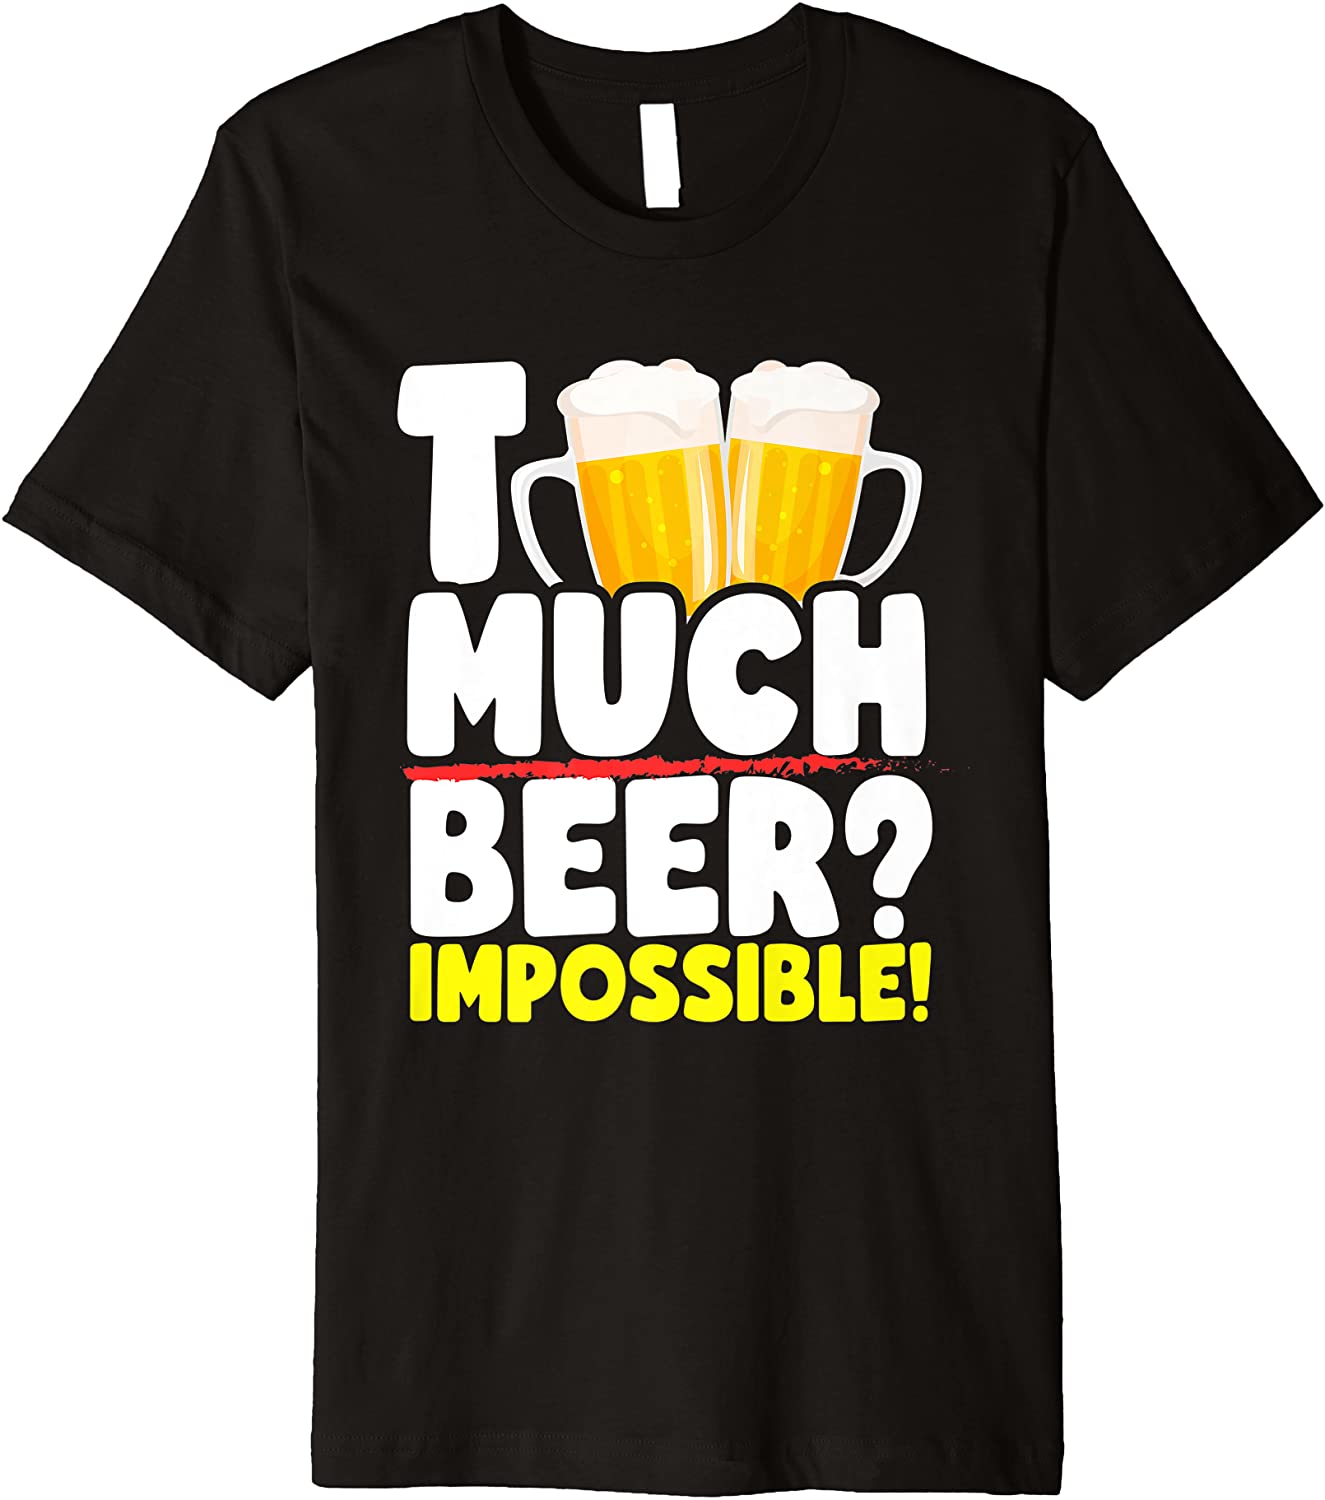 Amazon.com: Too Much Beer? Impossible Funny Beer Lovers Premium T